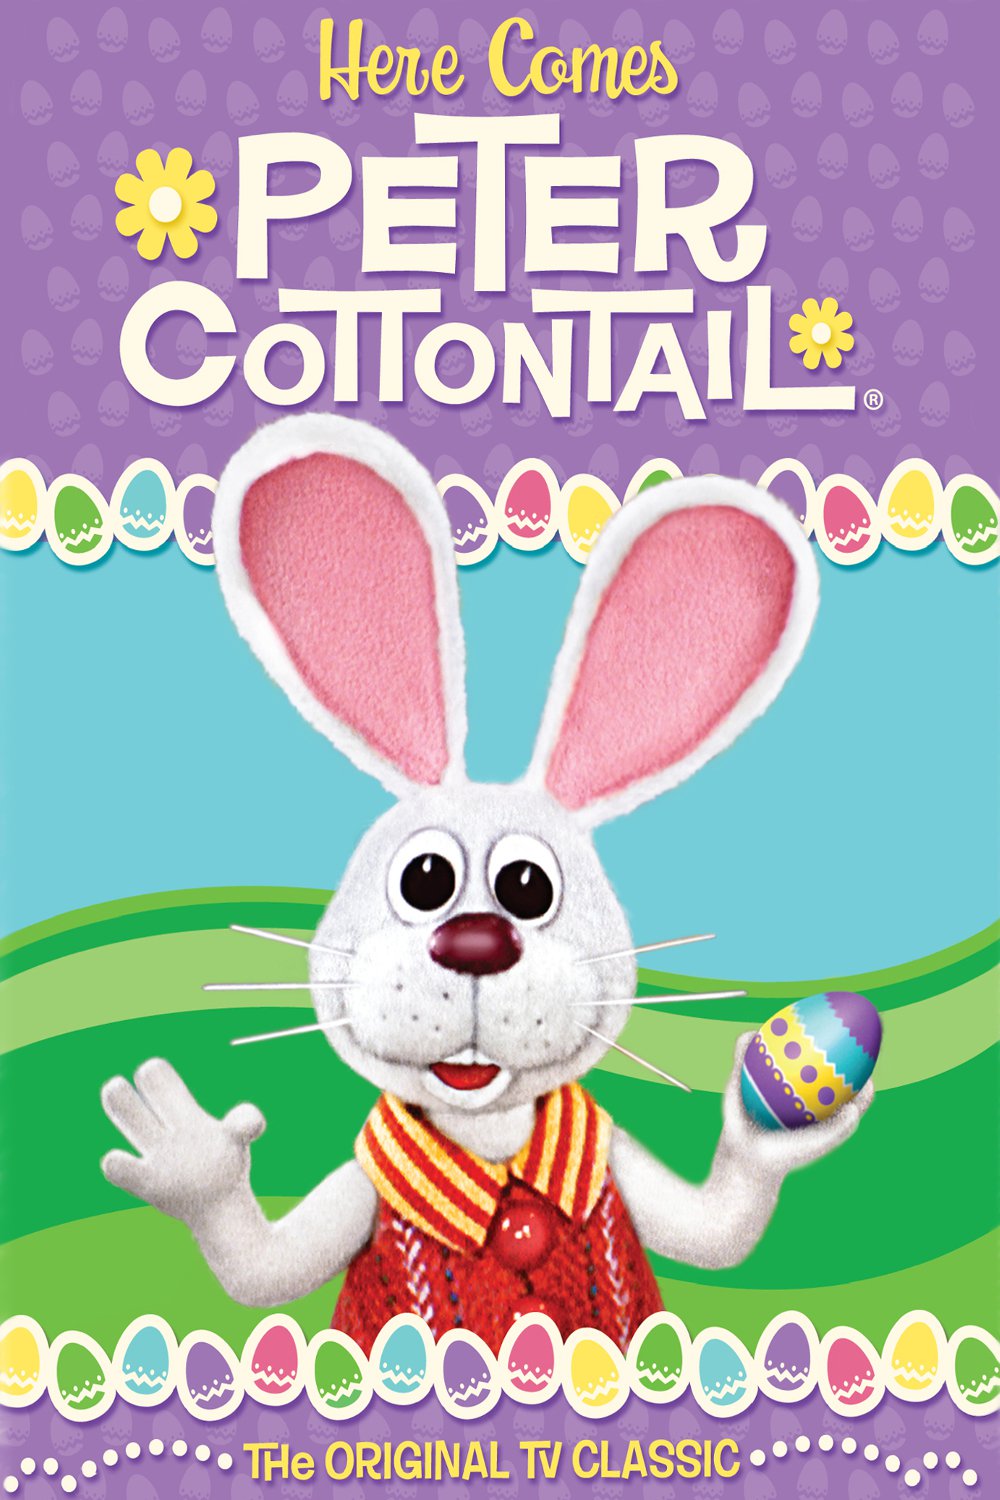 Poster for the movie "Here Comes Peter Cottontail"